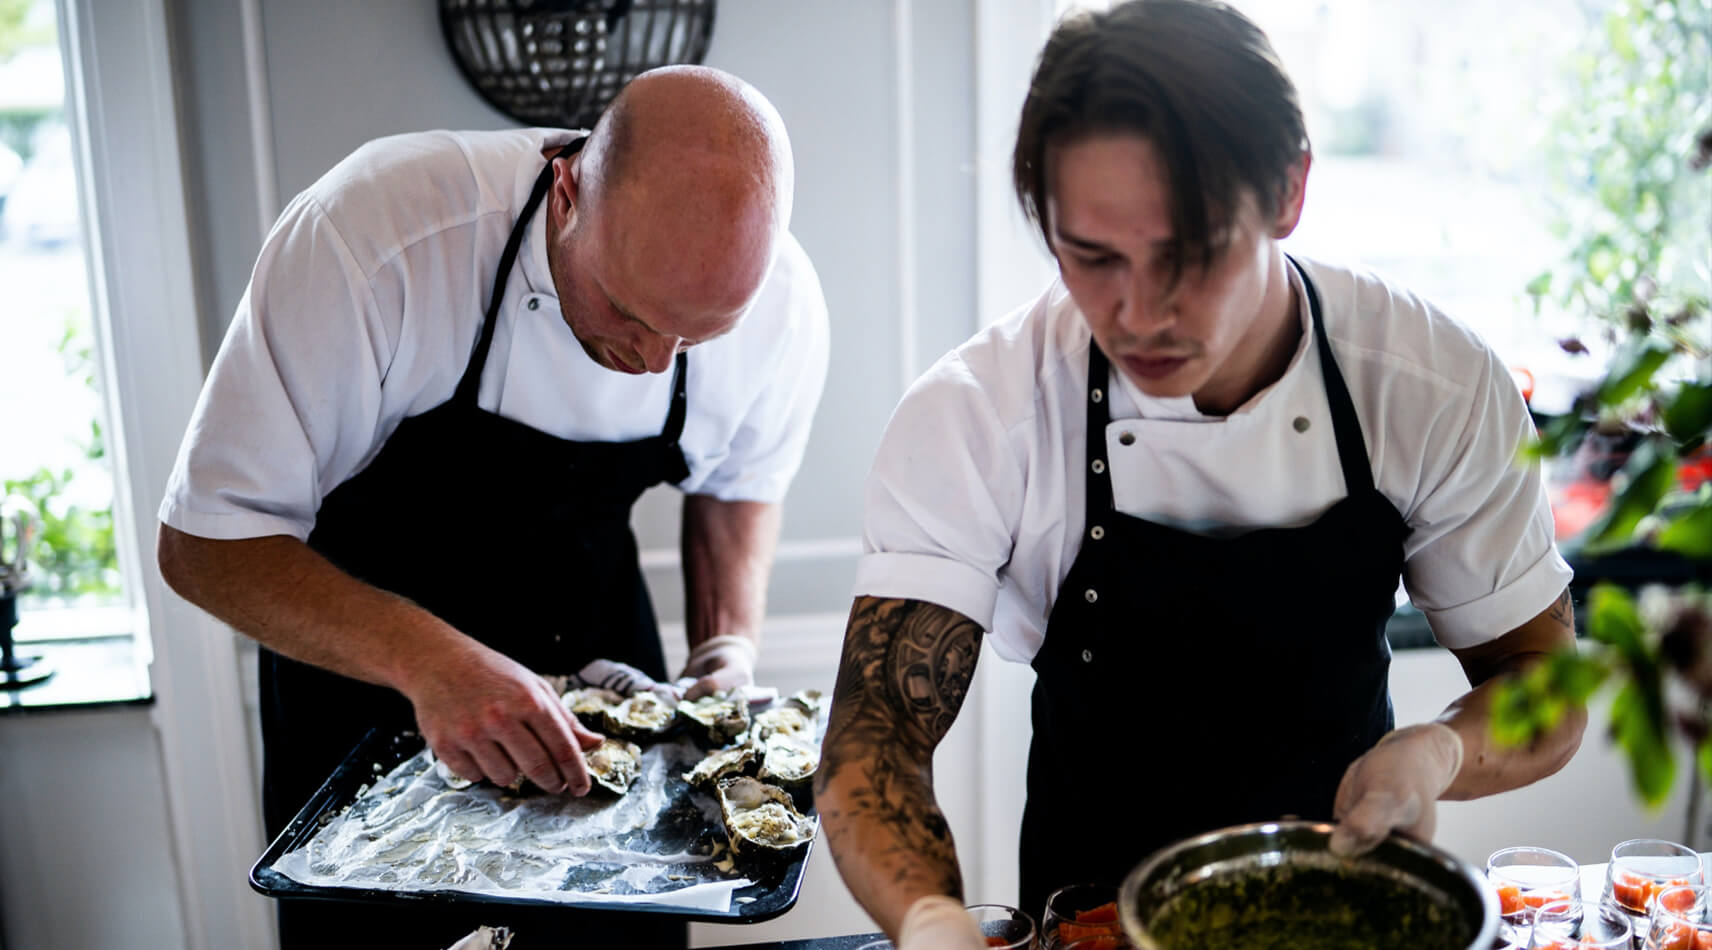 Co-ordination & Teamwork Tips from a sous chef